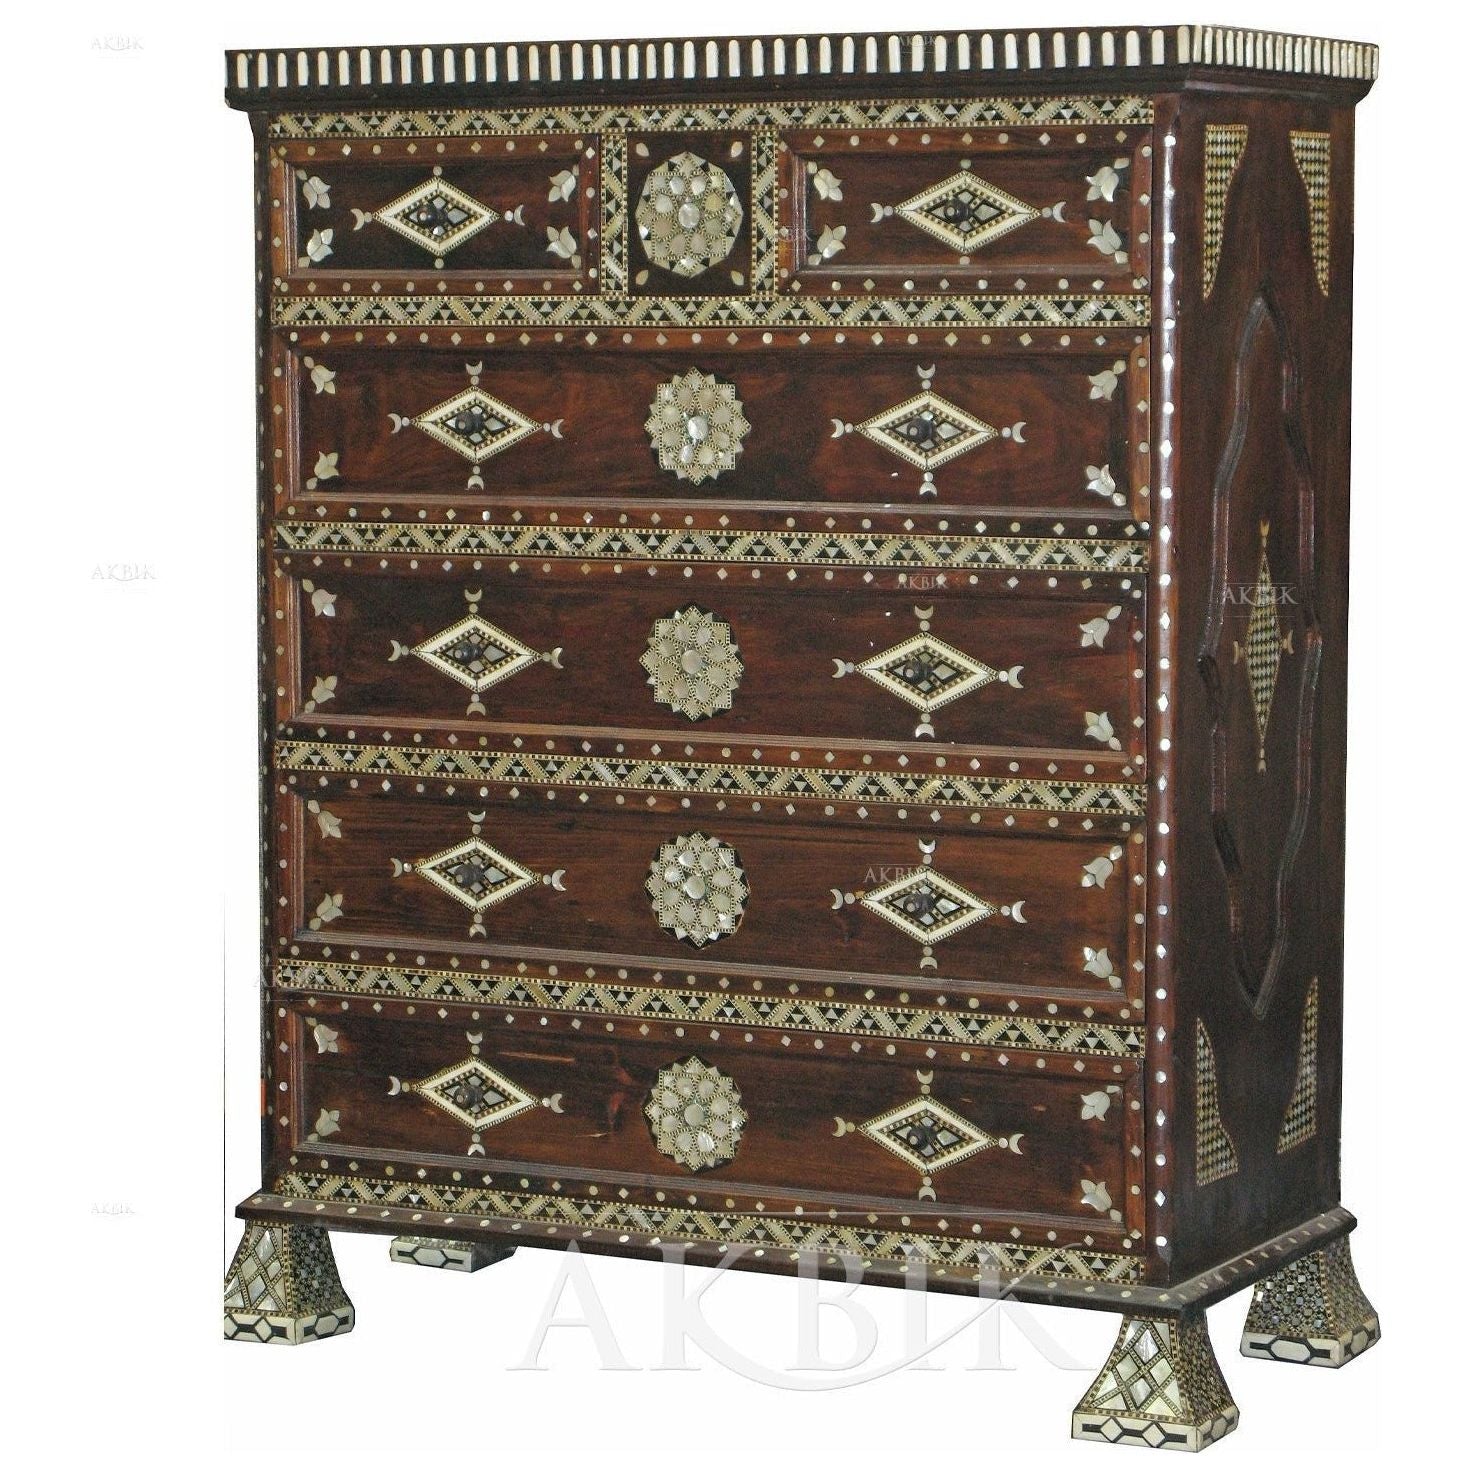 MOROCCAN STYLE MOTHER OF PEARL CHEST - AKBIK Furniture & Design